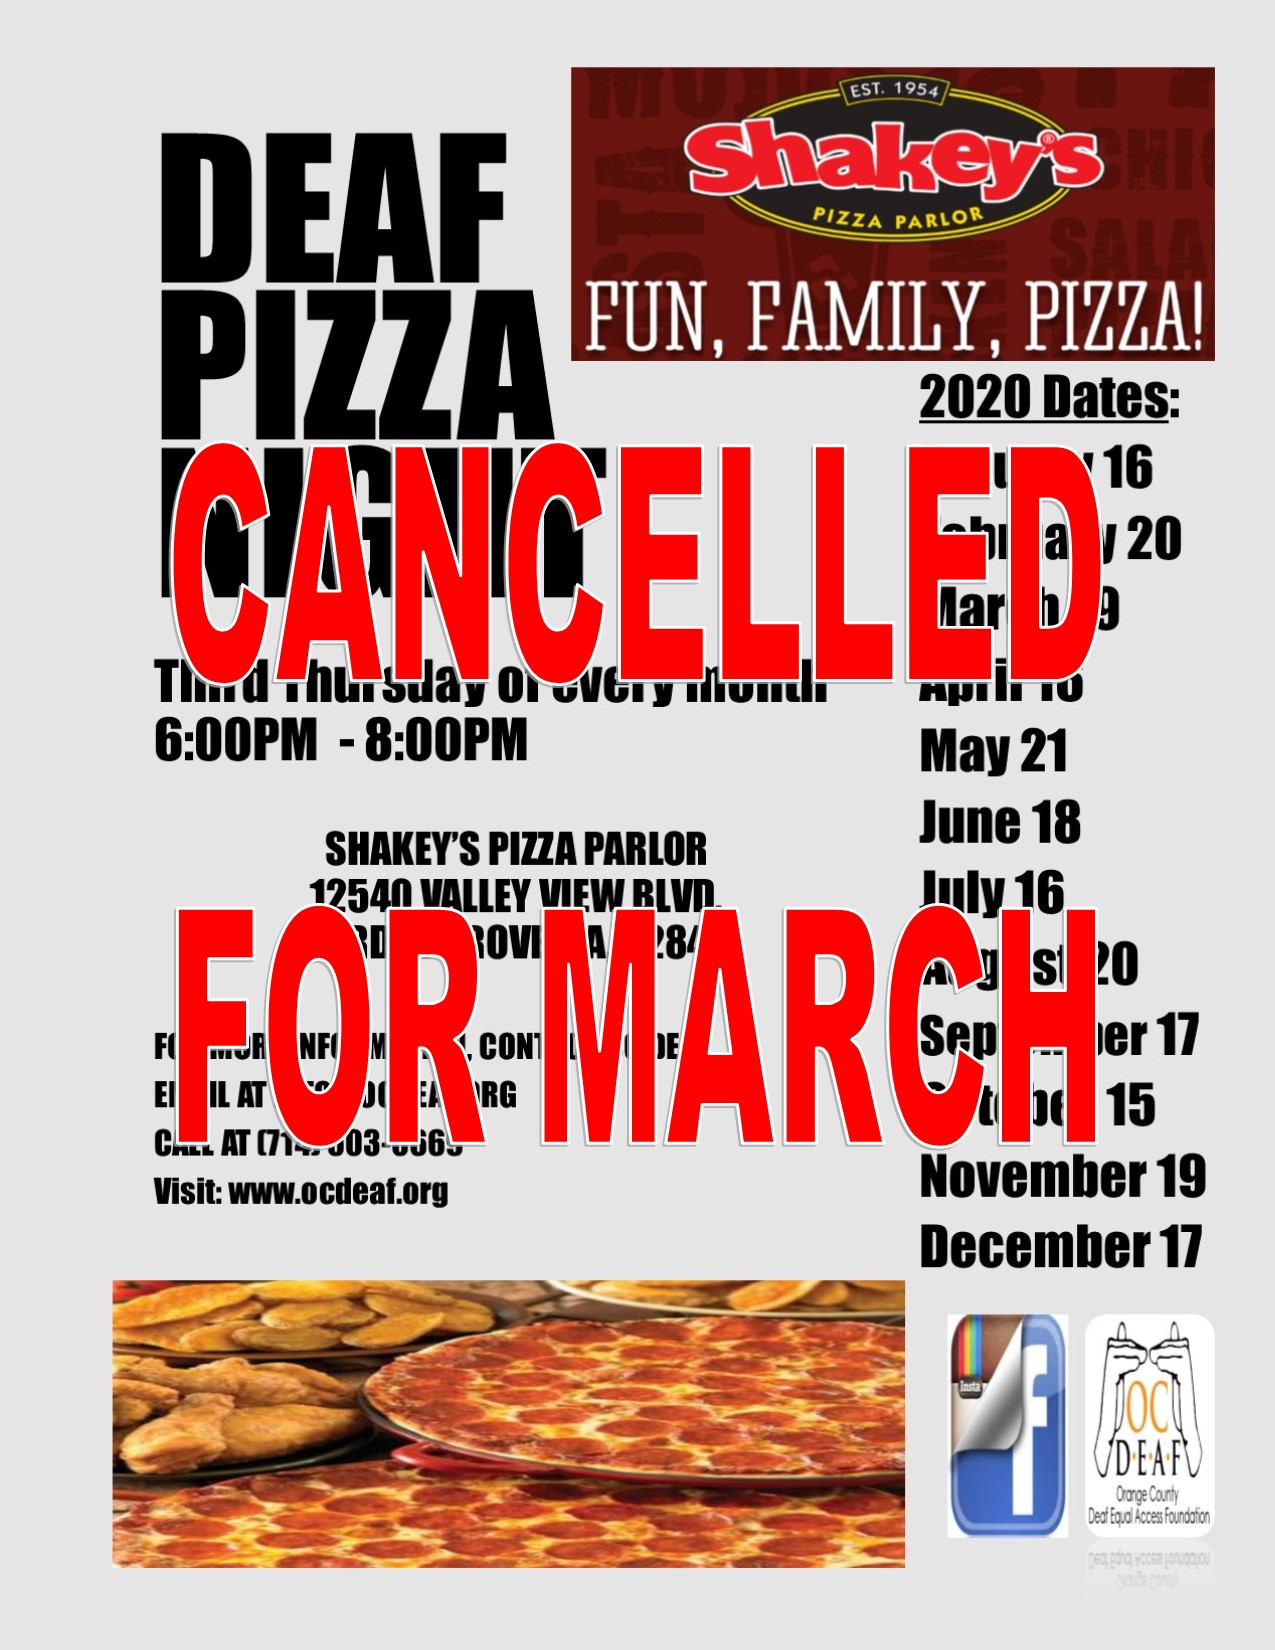 PIZZA NIGHT CANCELLED